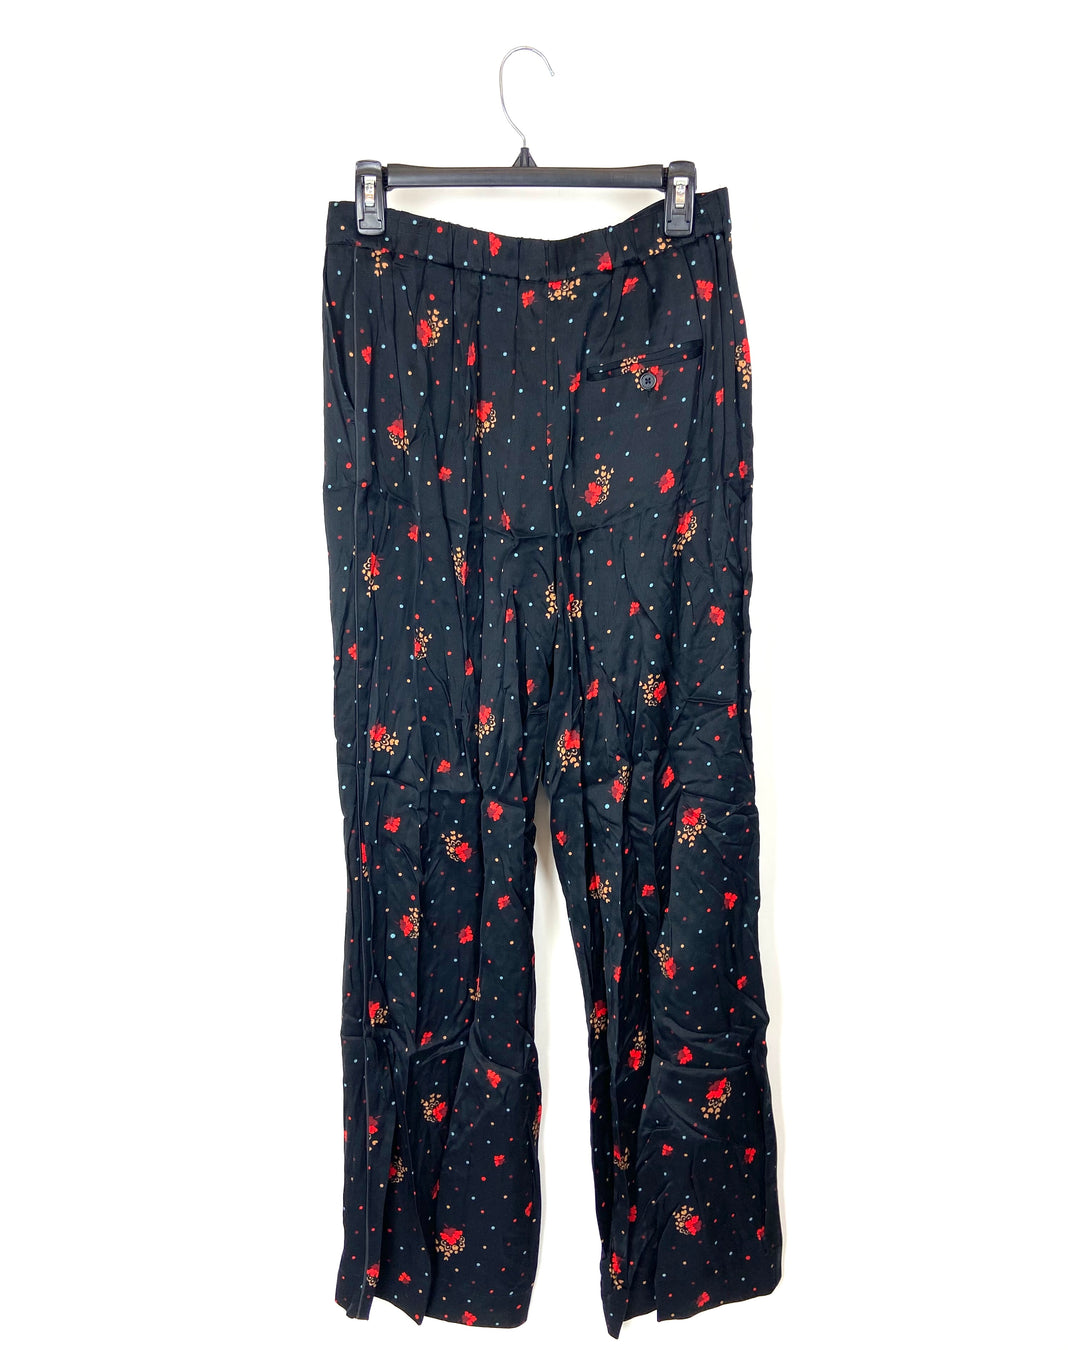 Black and Red Floral Print Pants - Size 8